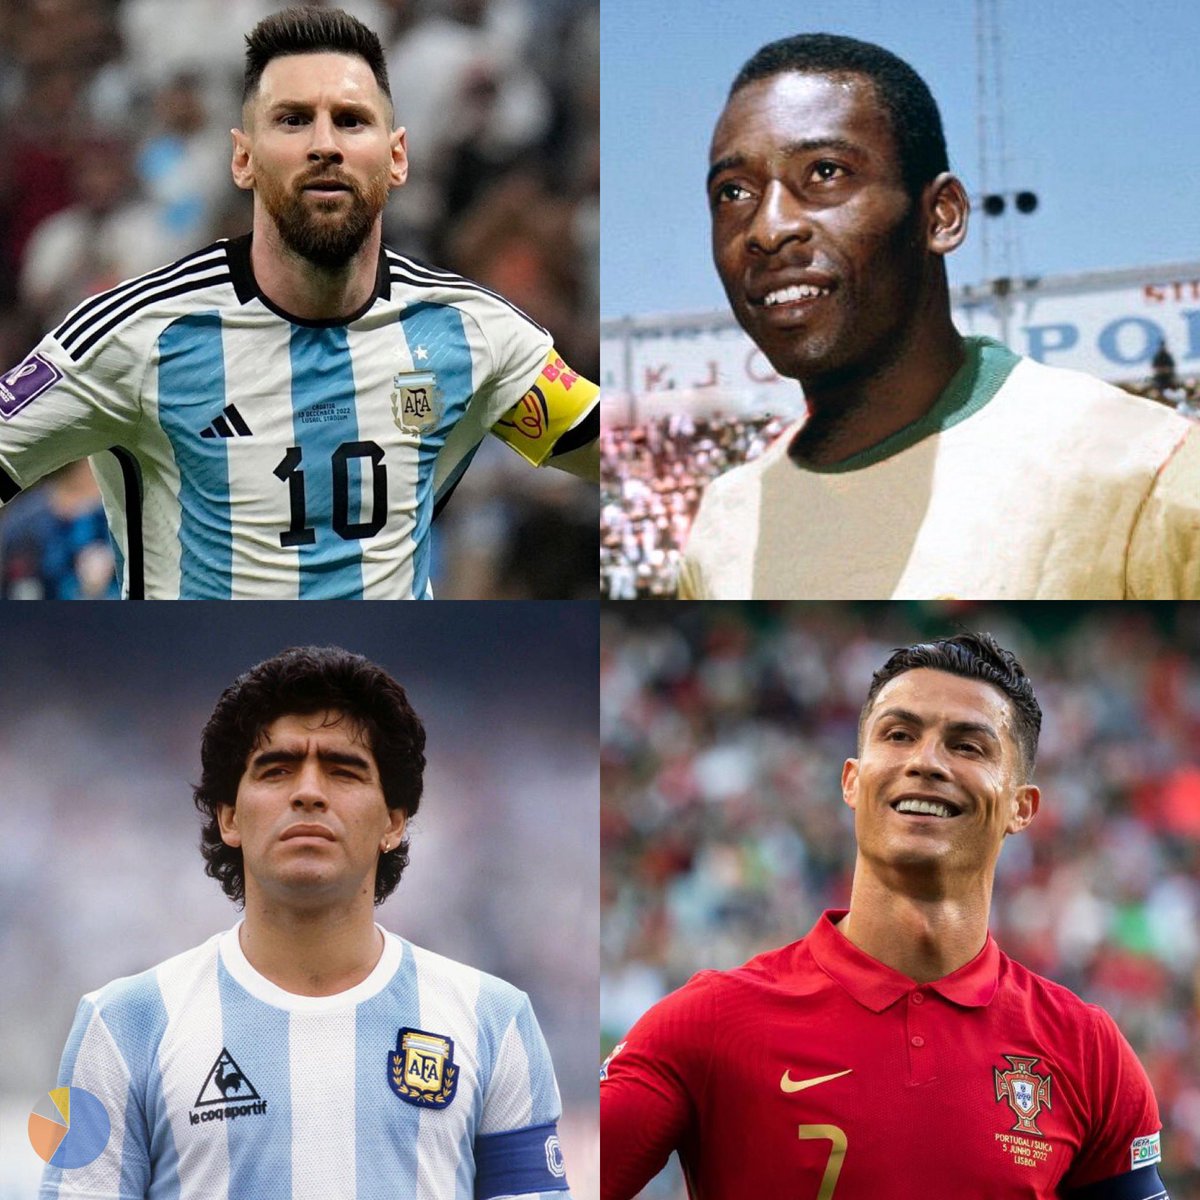 Who is the best football player of all time? #IndvsNep #AsiaCupOnHotstar
1. Lionel Messi
2. Pele
3. Diego Maradona
4. Cristiano Ronaldo